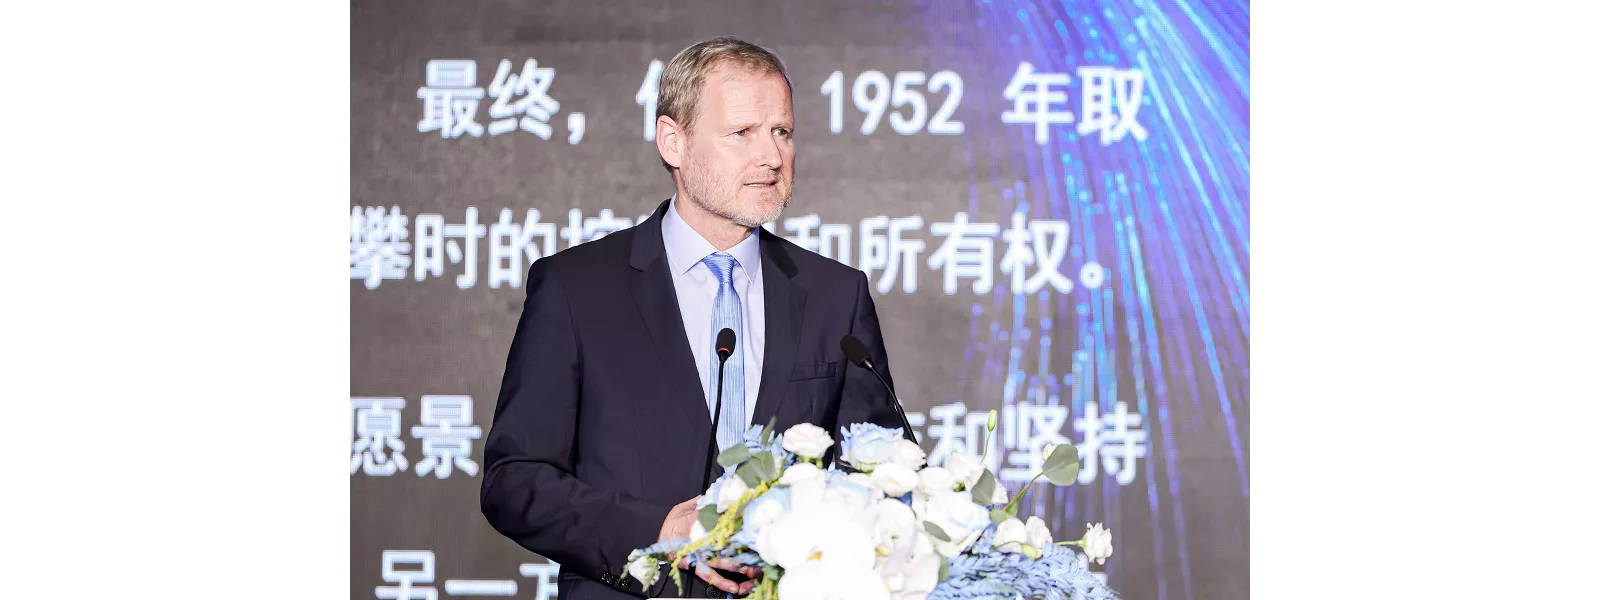 Andreas Feichtinger discusses the tenth anniversary of Plansee China